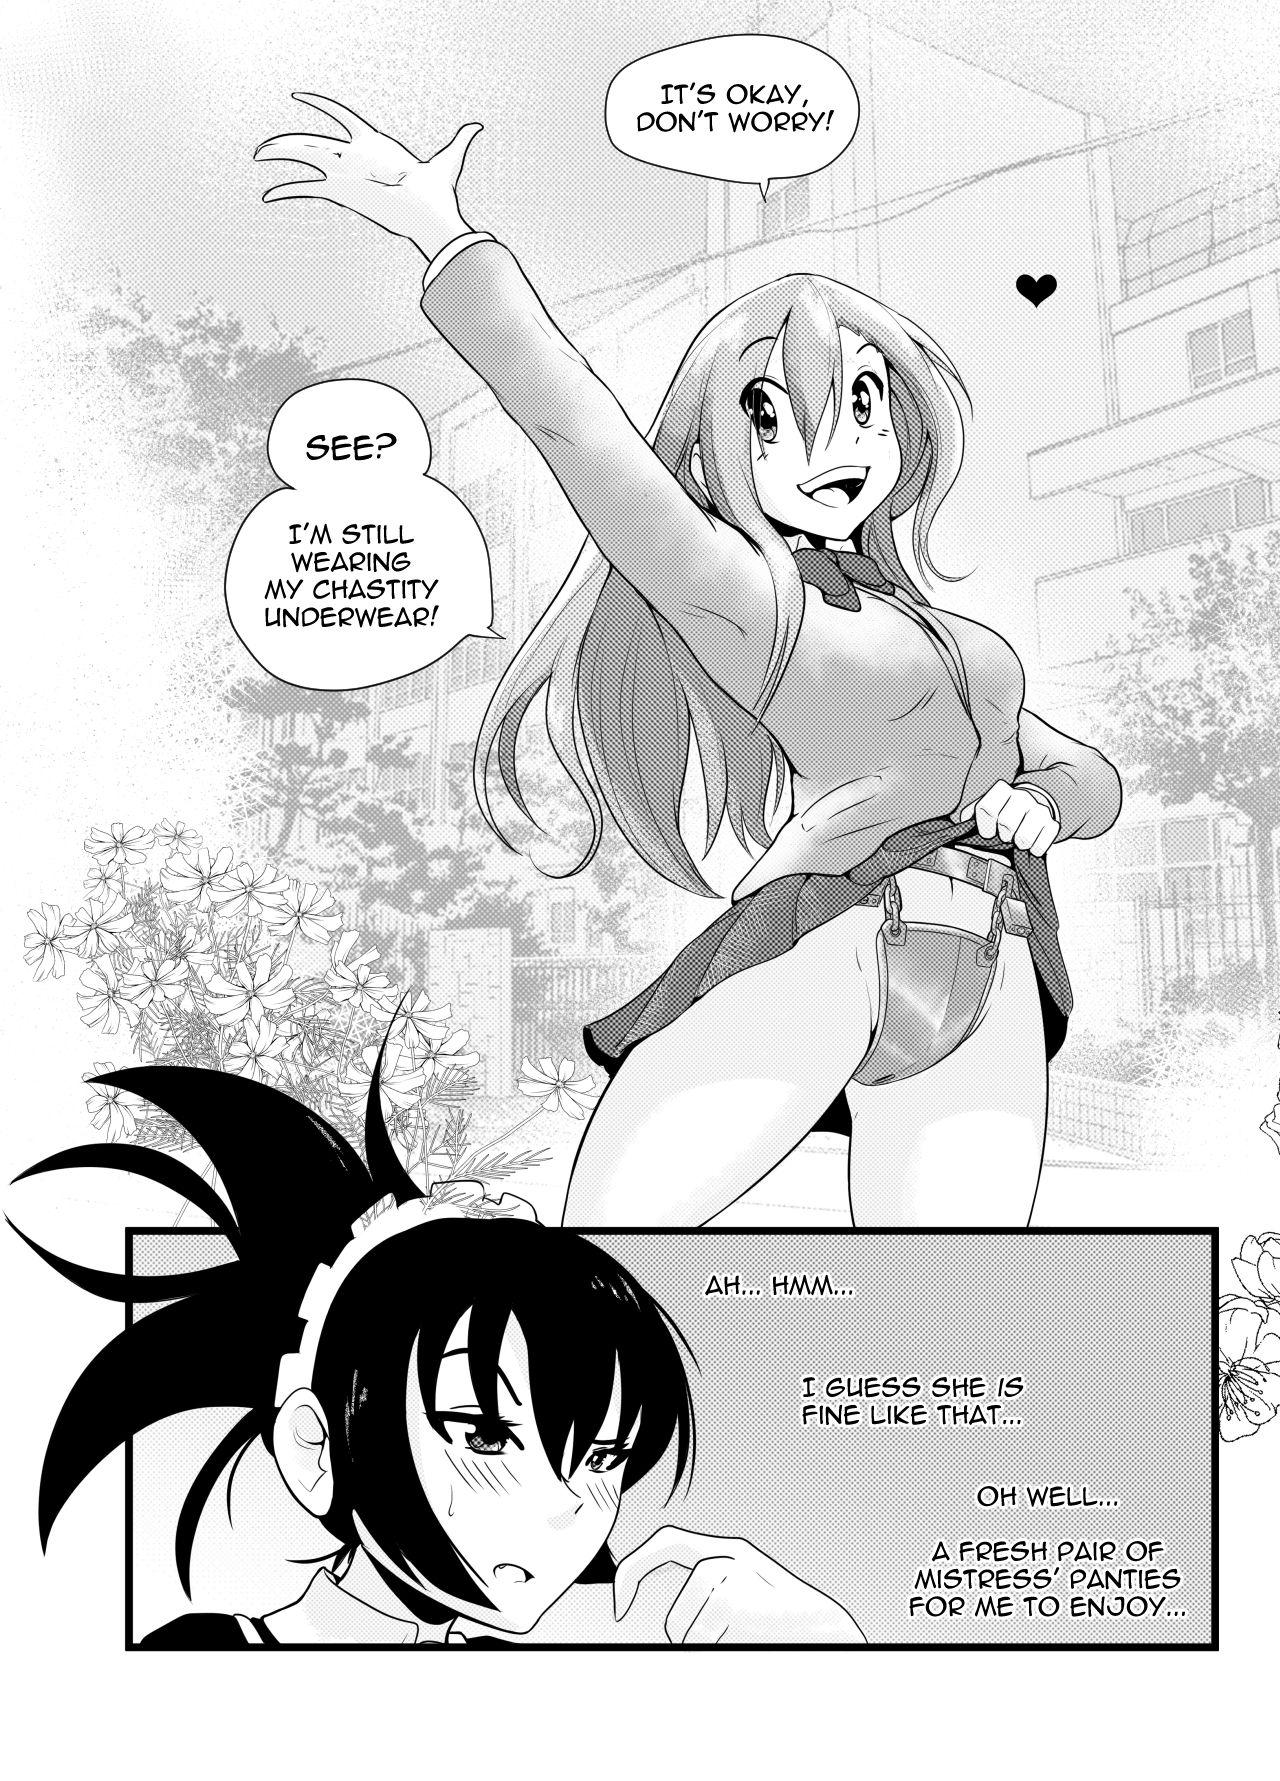 Couple Sex I Was Caught Masturbating by My Maid and She Locked Me in a Chastity Belt! - Seitokai yakuindomo Brunettes - Page 12